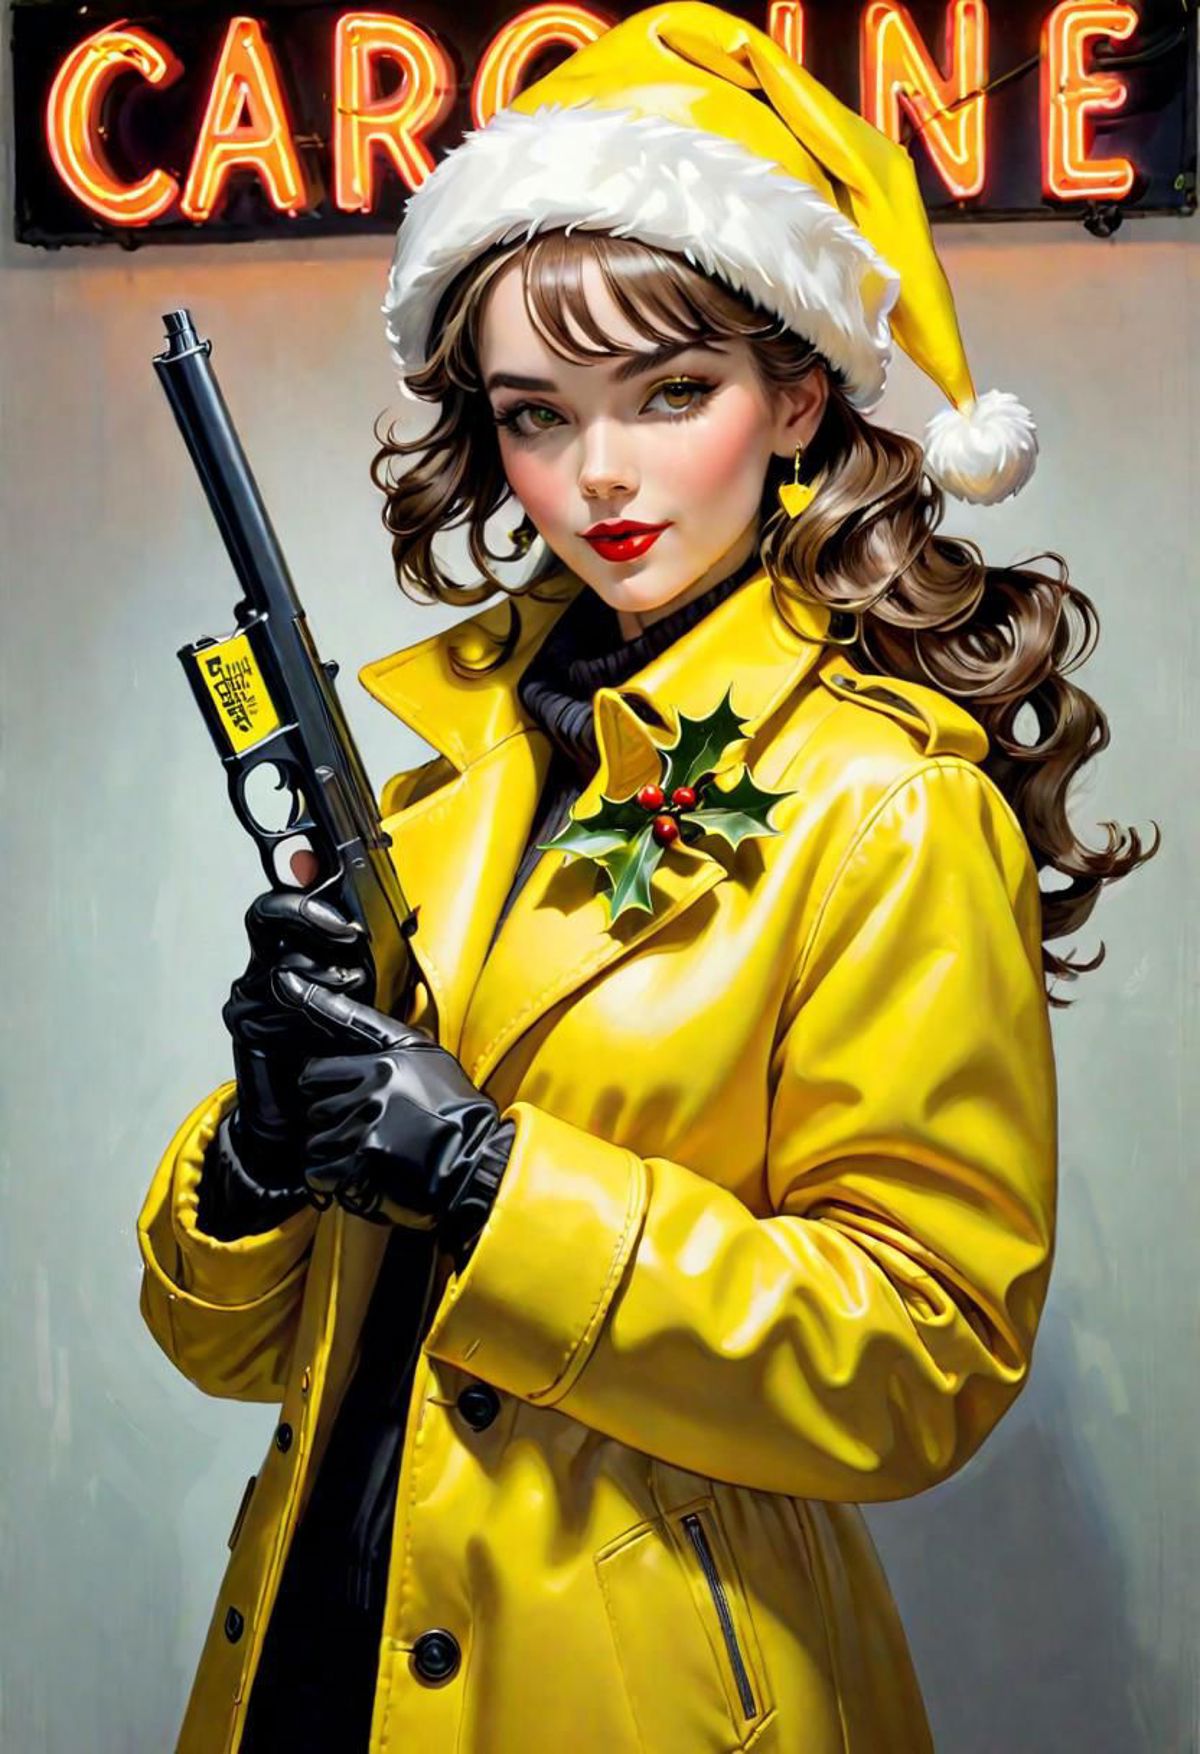 A painting of a woman wearing a yellow coat and a Santa hat holding a gun.